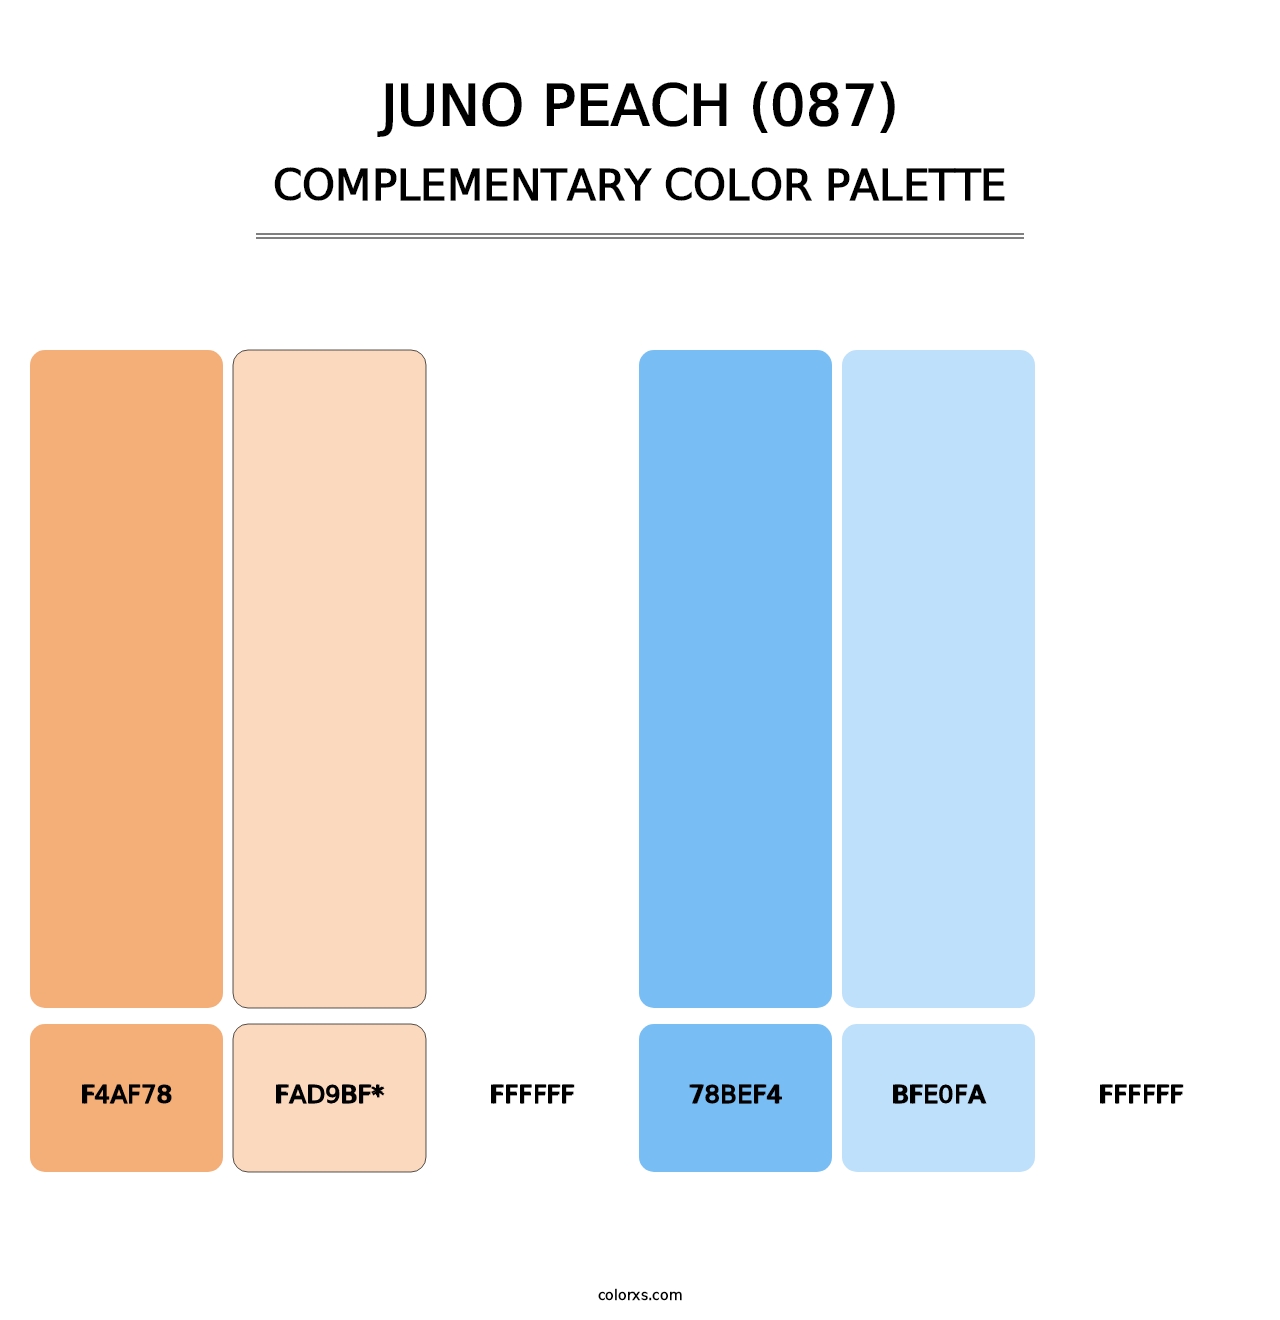 Juno Peach (087) - Complementary Color Palette